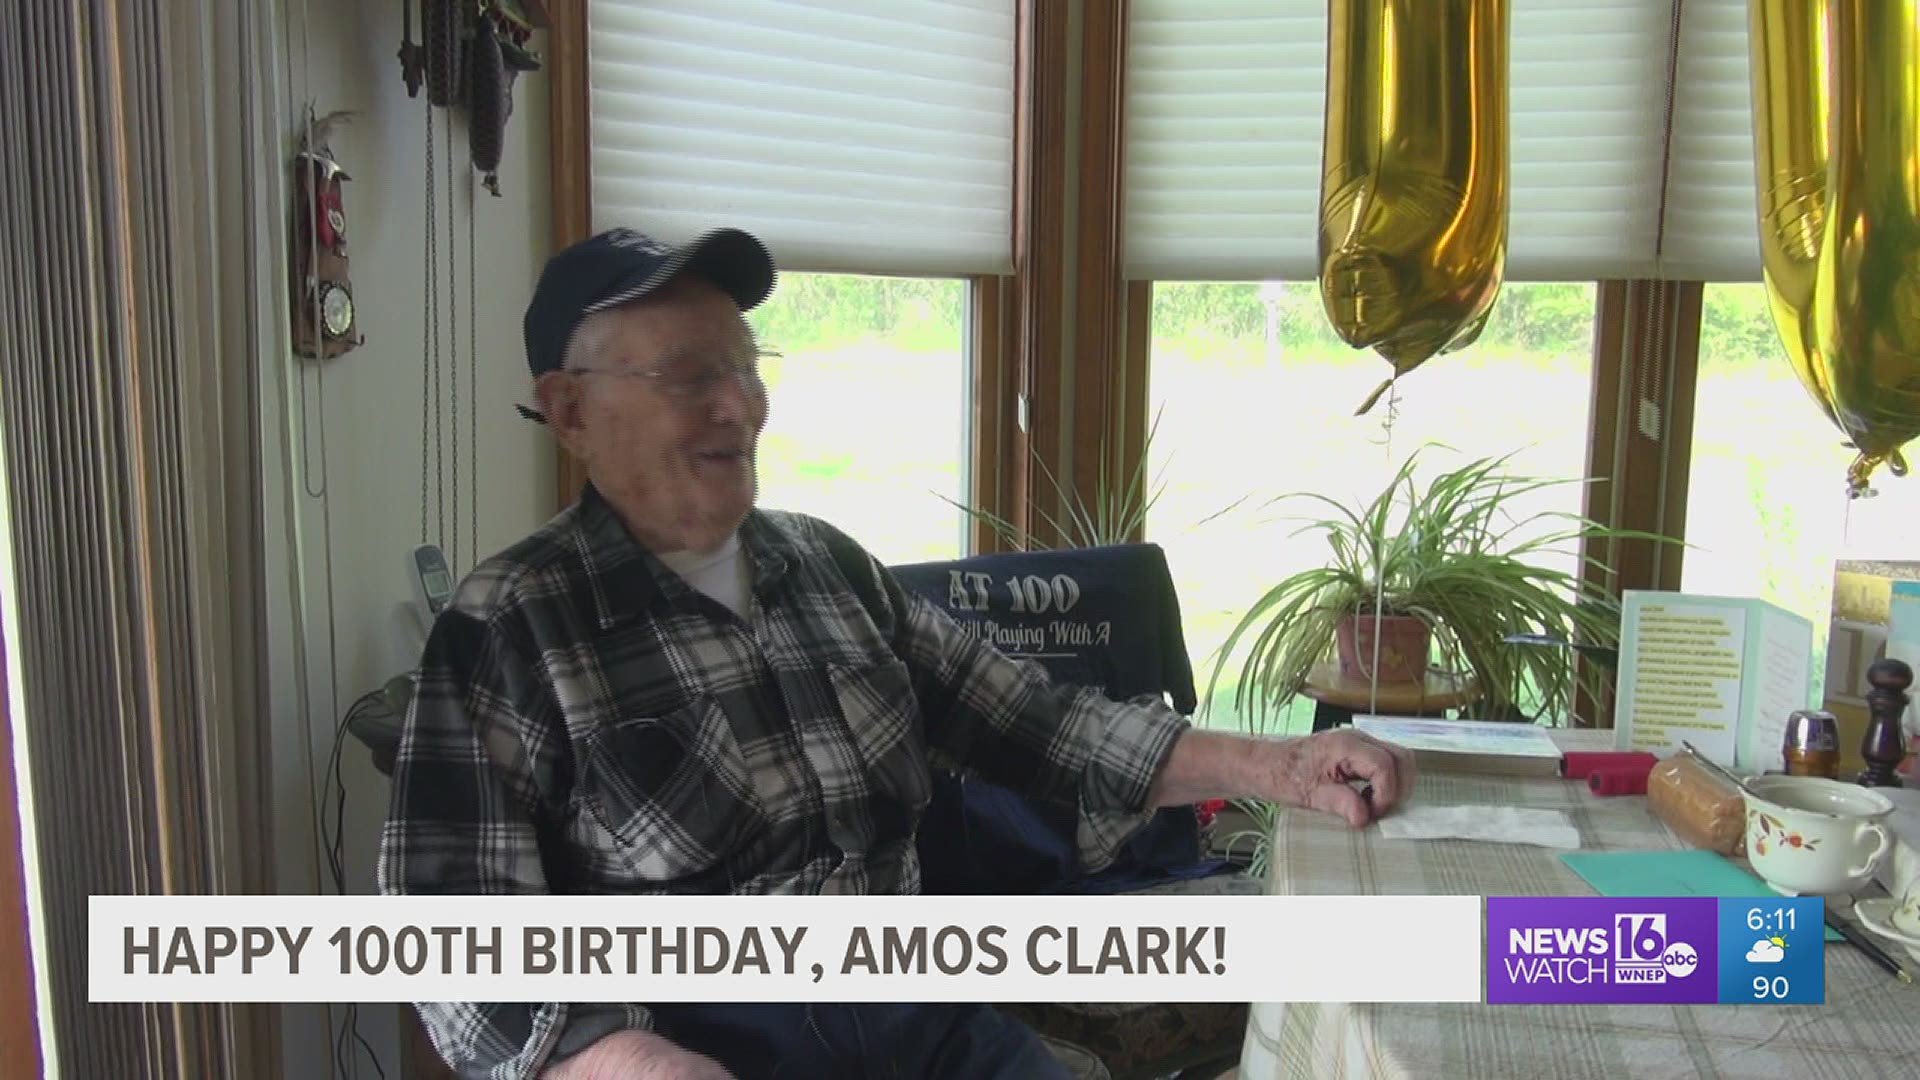 A man from Lackawanna County and fifth-generation descendant of the founding father of Clarks summit and Clarks Green turns a century old.